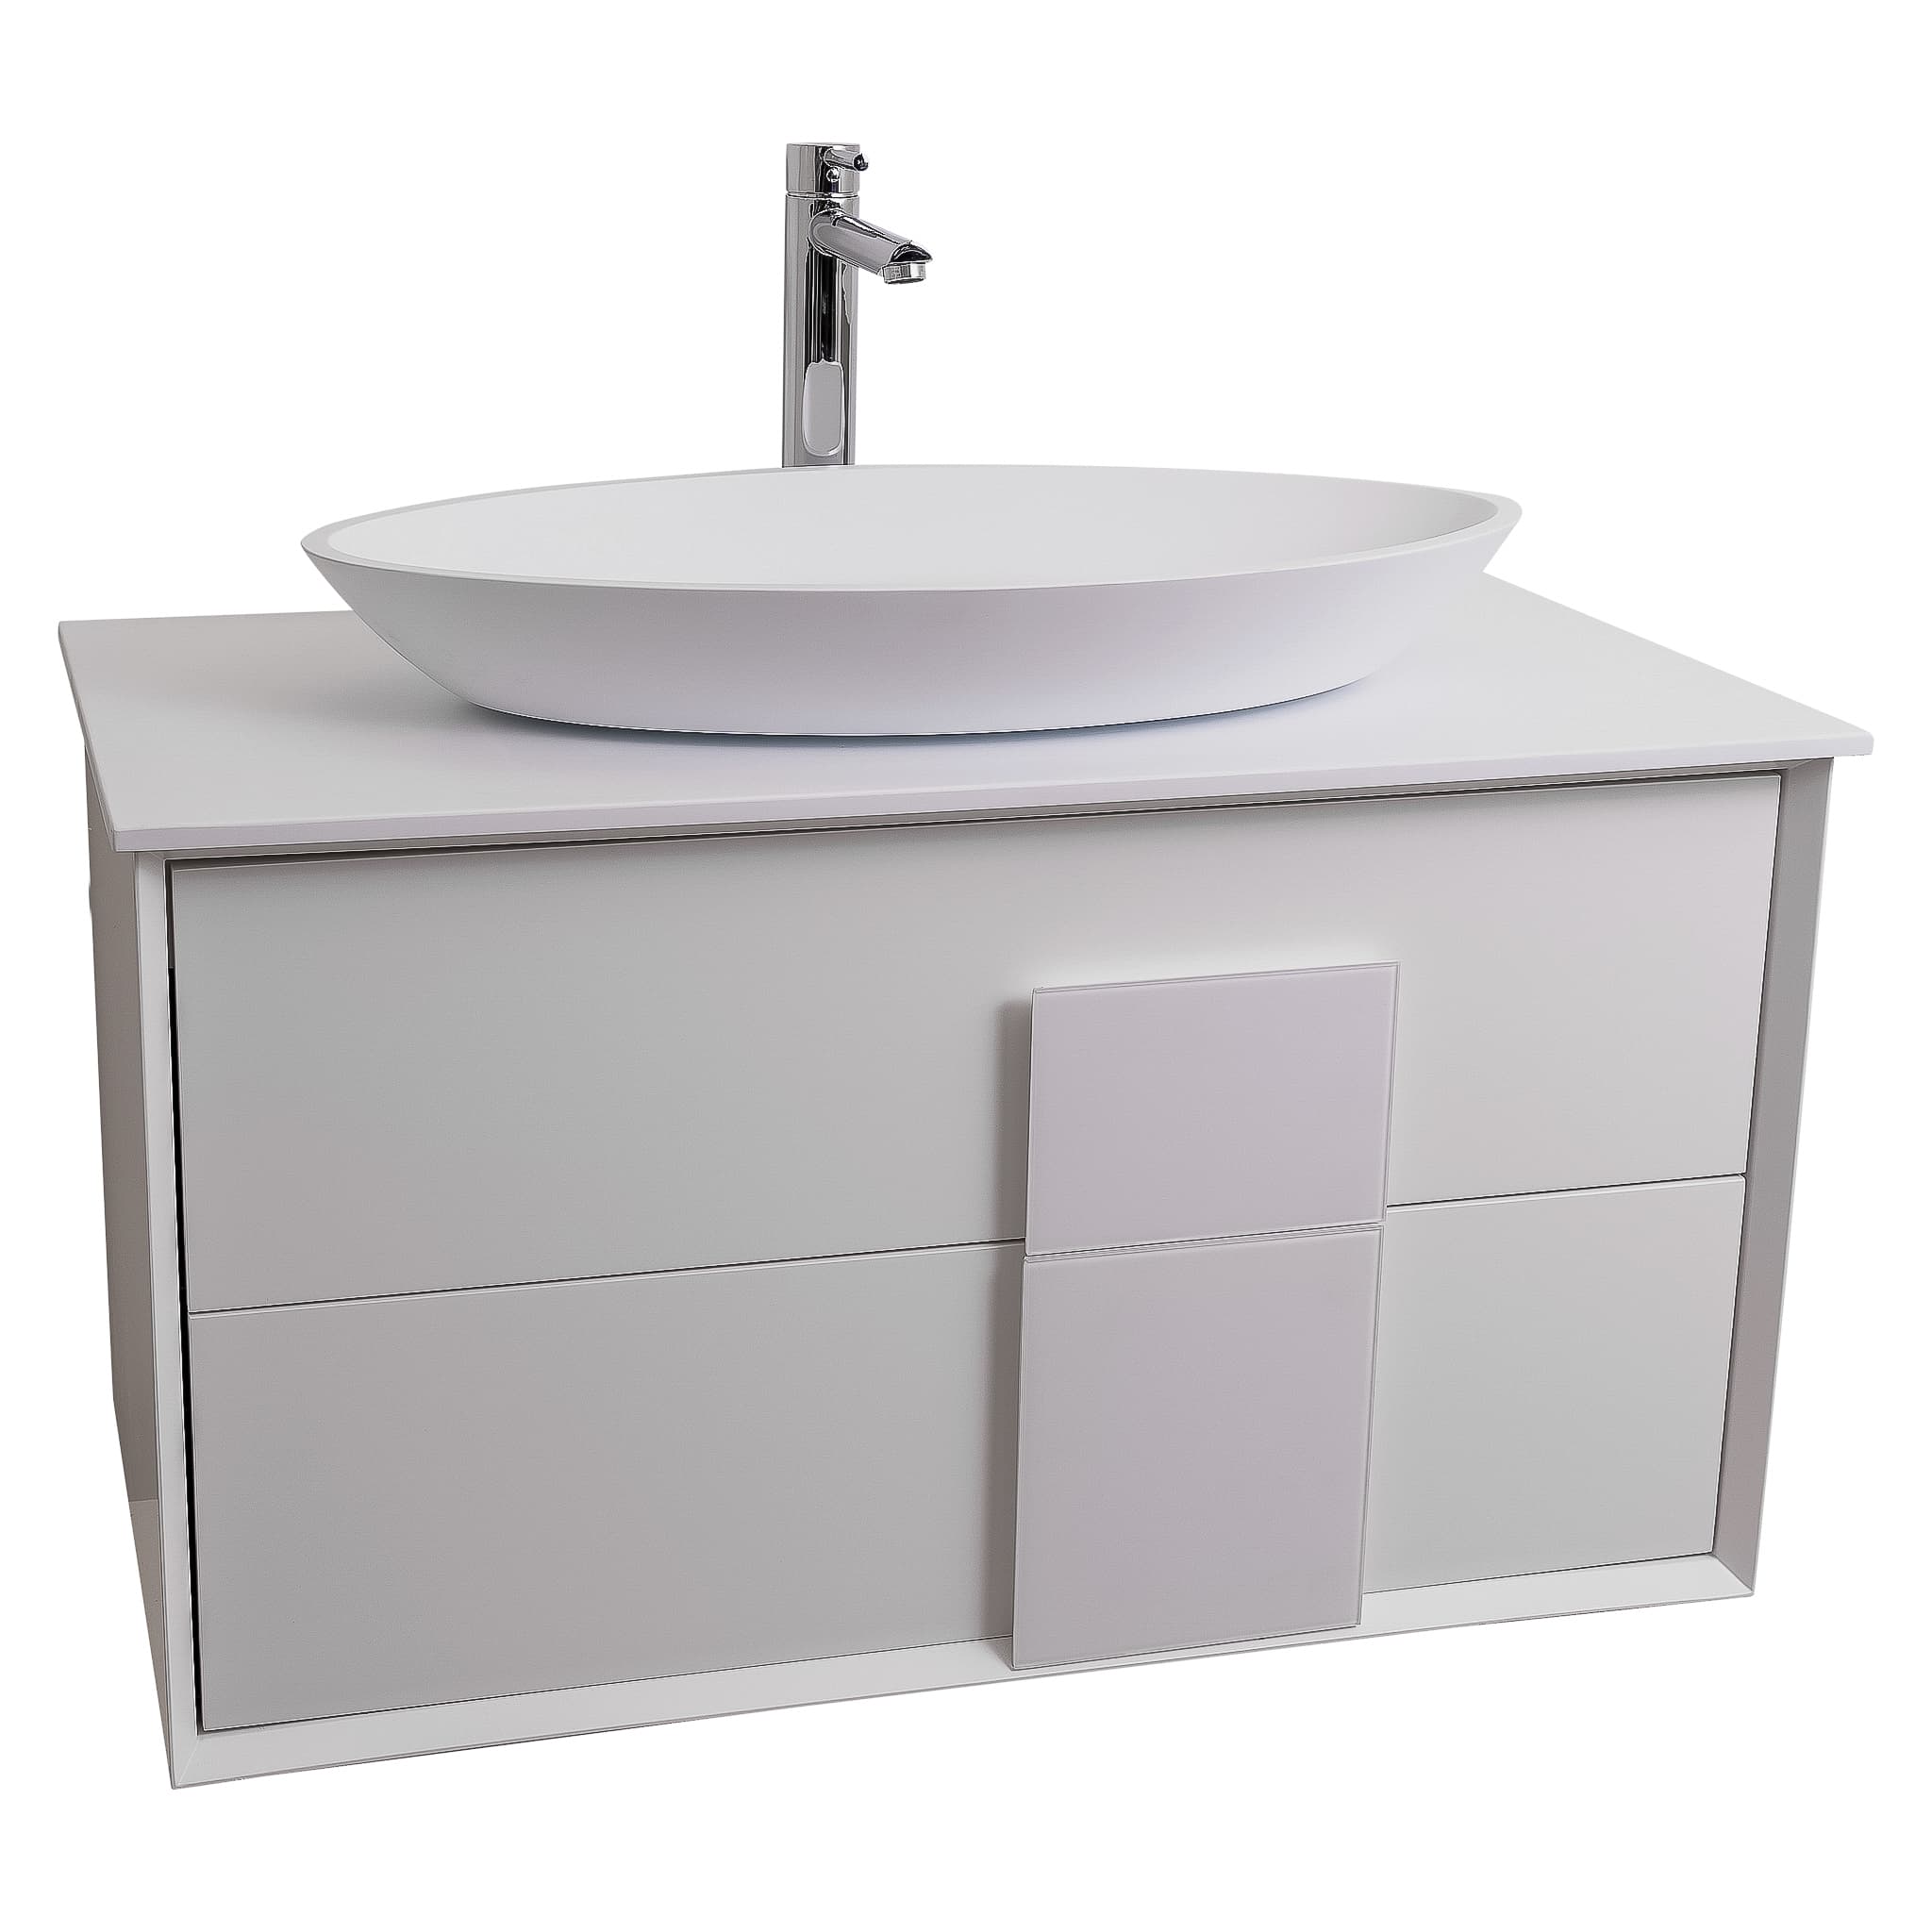 Piazza 31.5 Matte White With White Handle Cabinet, Solid Surface Flat White Counter and Oval Solid Surface White Basin 1305, Wall Mounted Modern Vanity Set